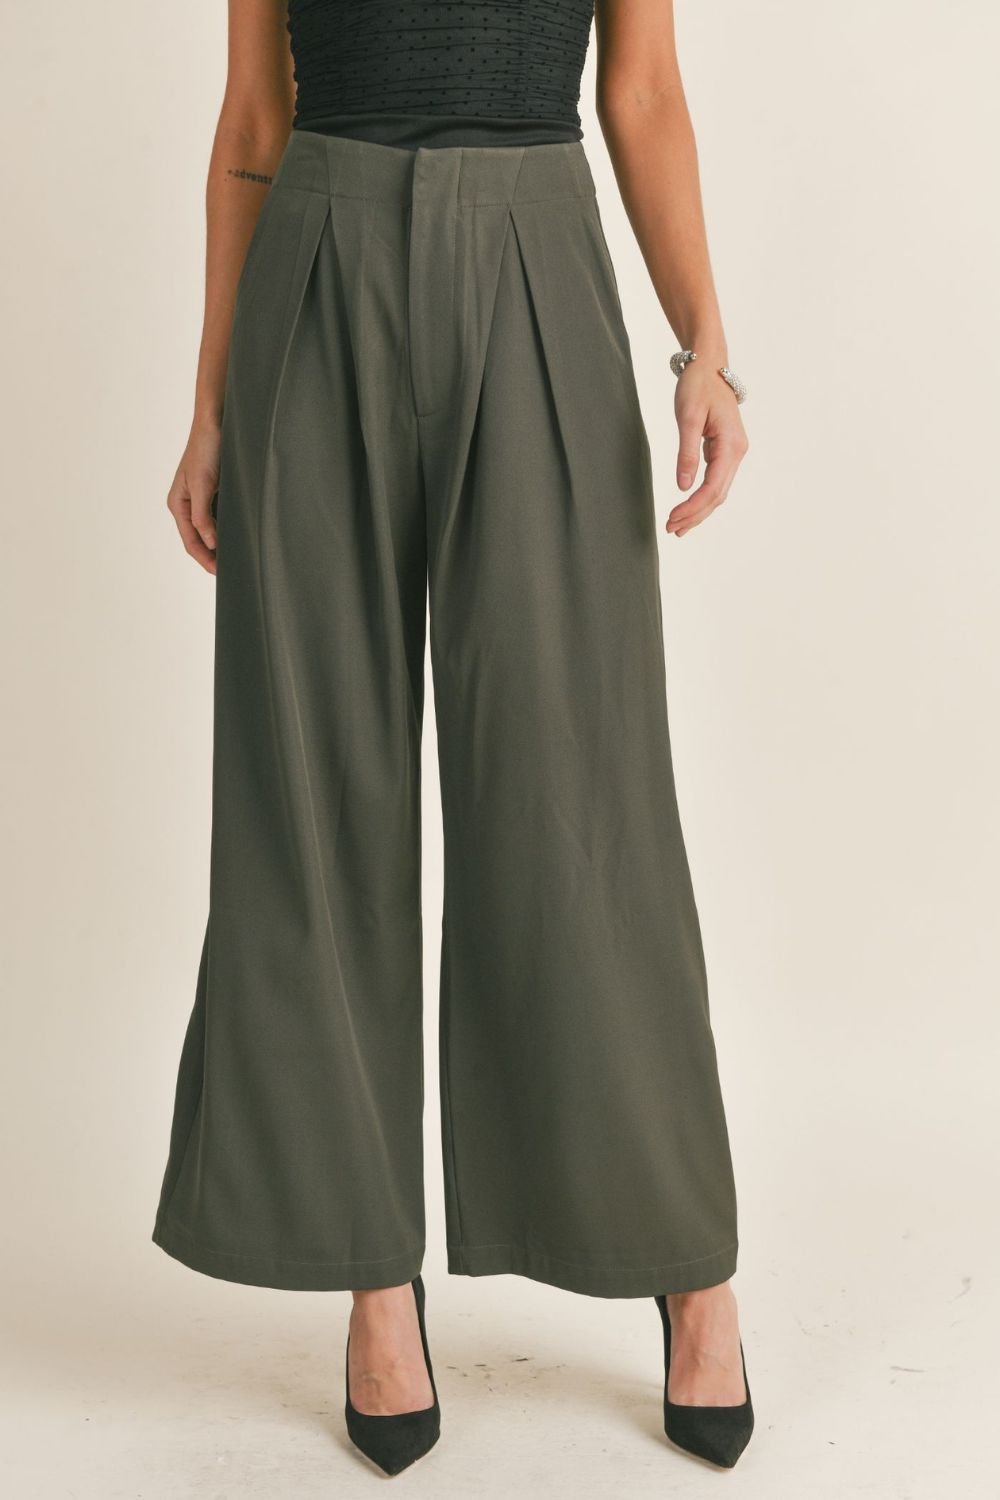 The Avery Pleated Wide-Leg Trousers by Maeve | Anthropologie